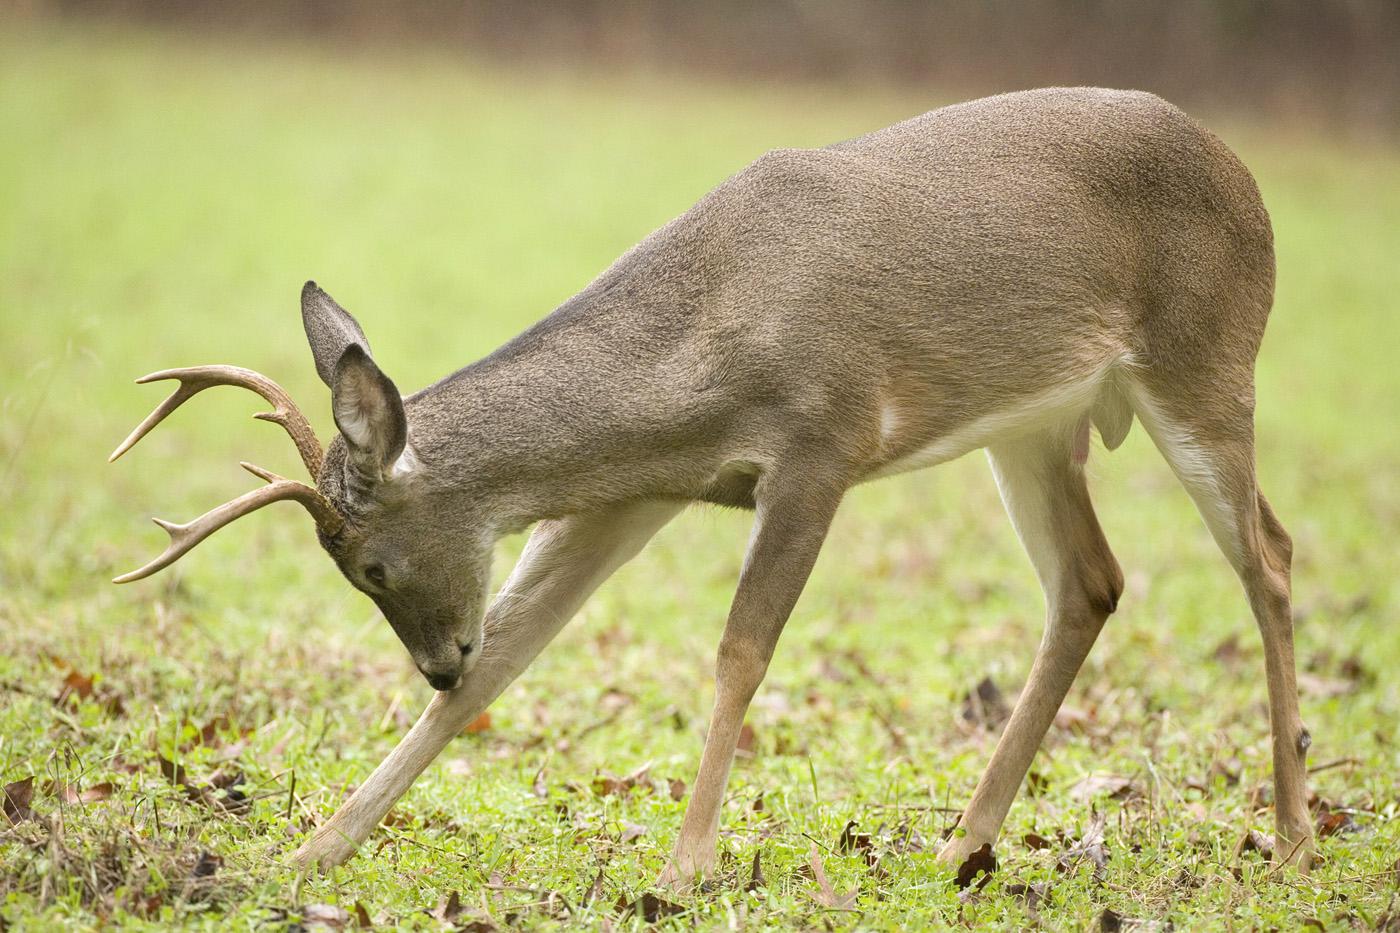 Research conducted by Mississippi State University shows that protecting younger bucks improves the health of the deer population. (Photo by Steve Gulledge)